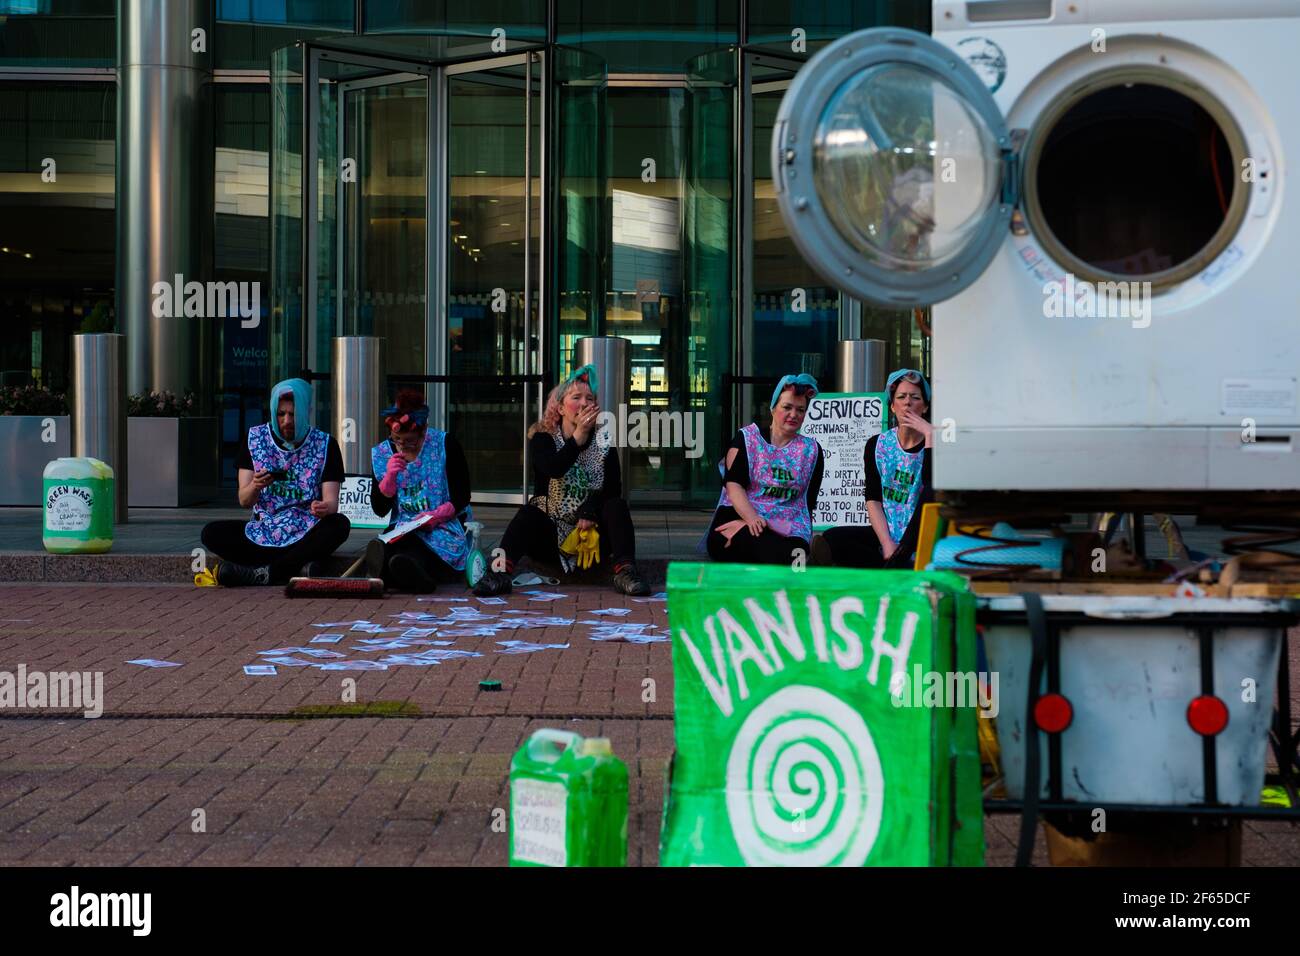 London, UK. 30th Mar, 2021. People dressed as old fashioned cleaners  demonstrate in front of Barclays Bank headquarters in Canary Wharf to bring  attention to the 'dirty money' that finances climate change